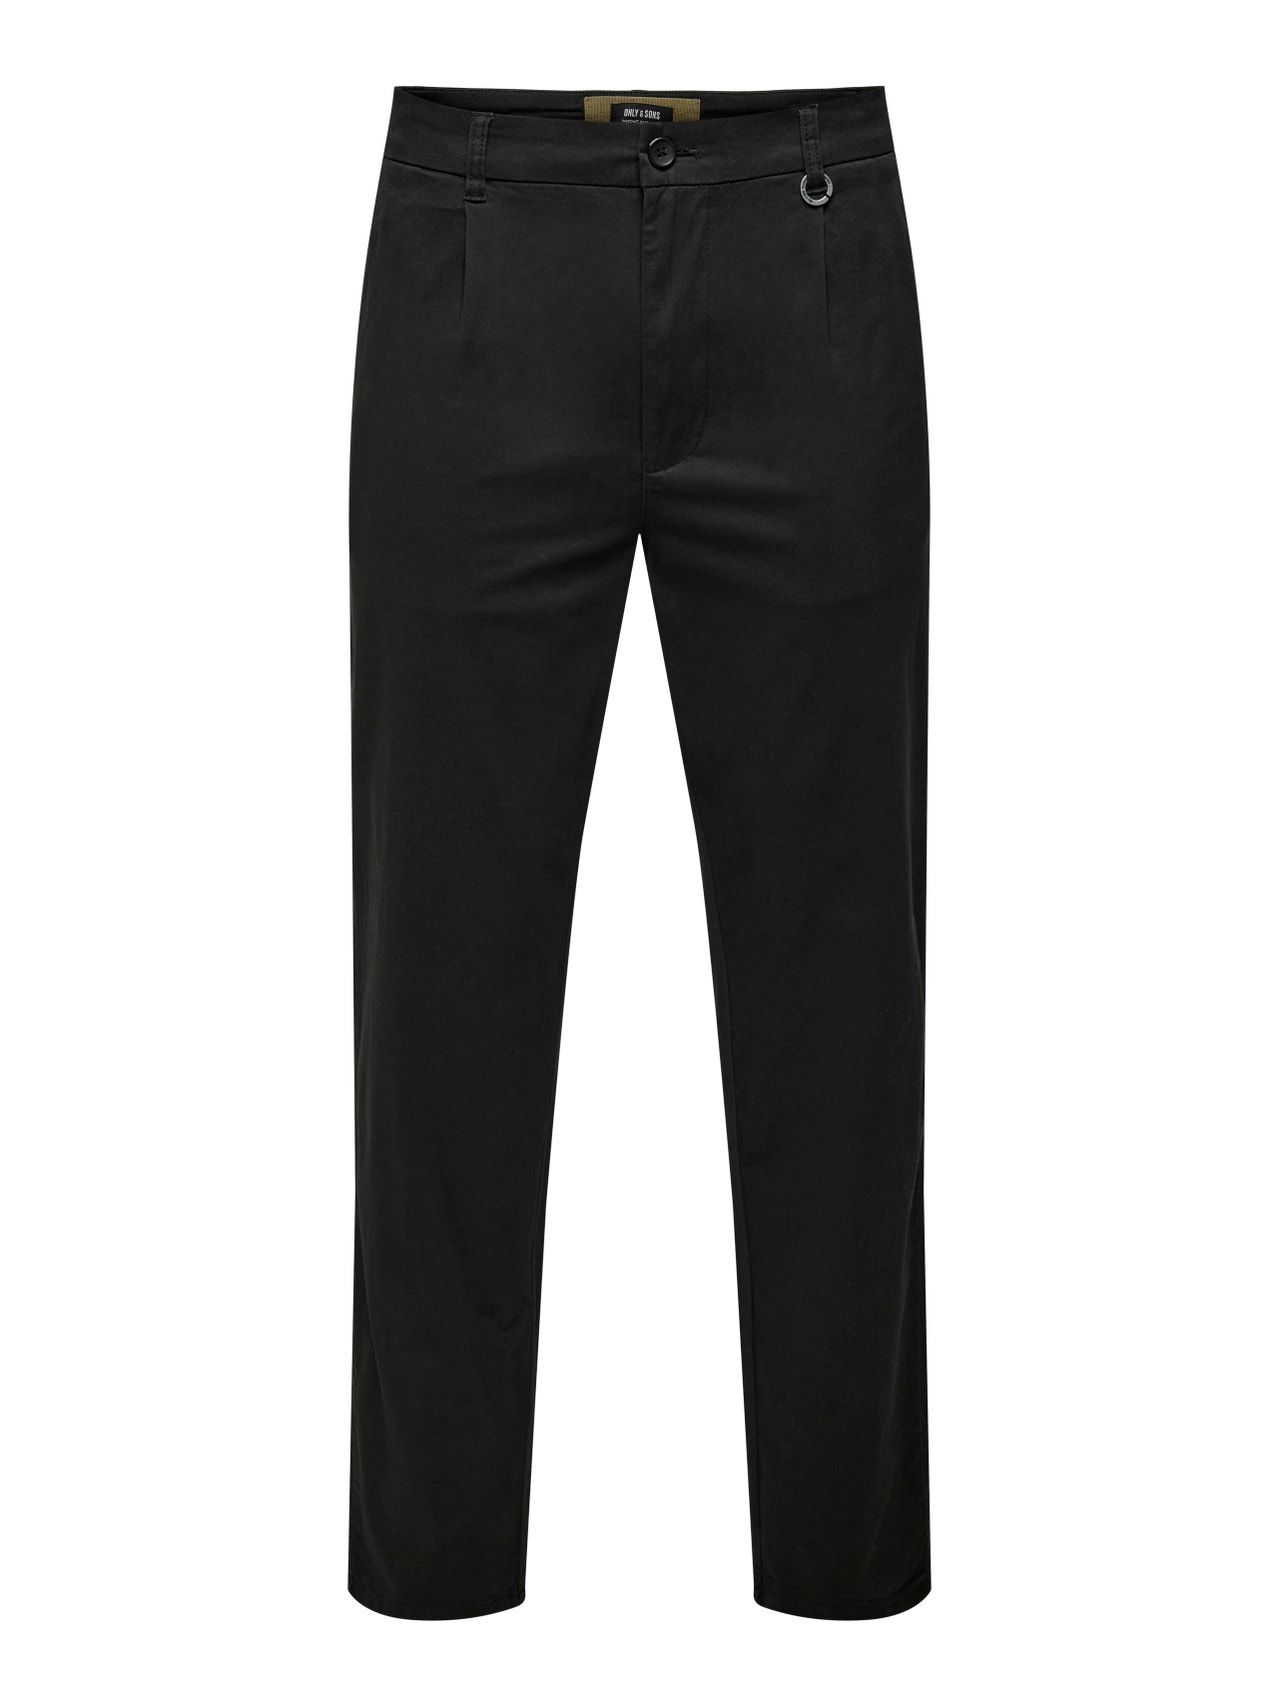 ONLY & SONS Tapered Fit Mid rise Trousers -Black - 22026225